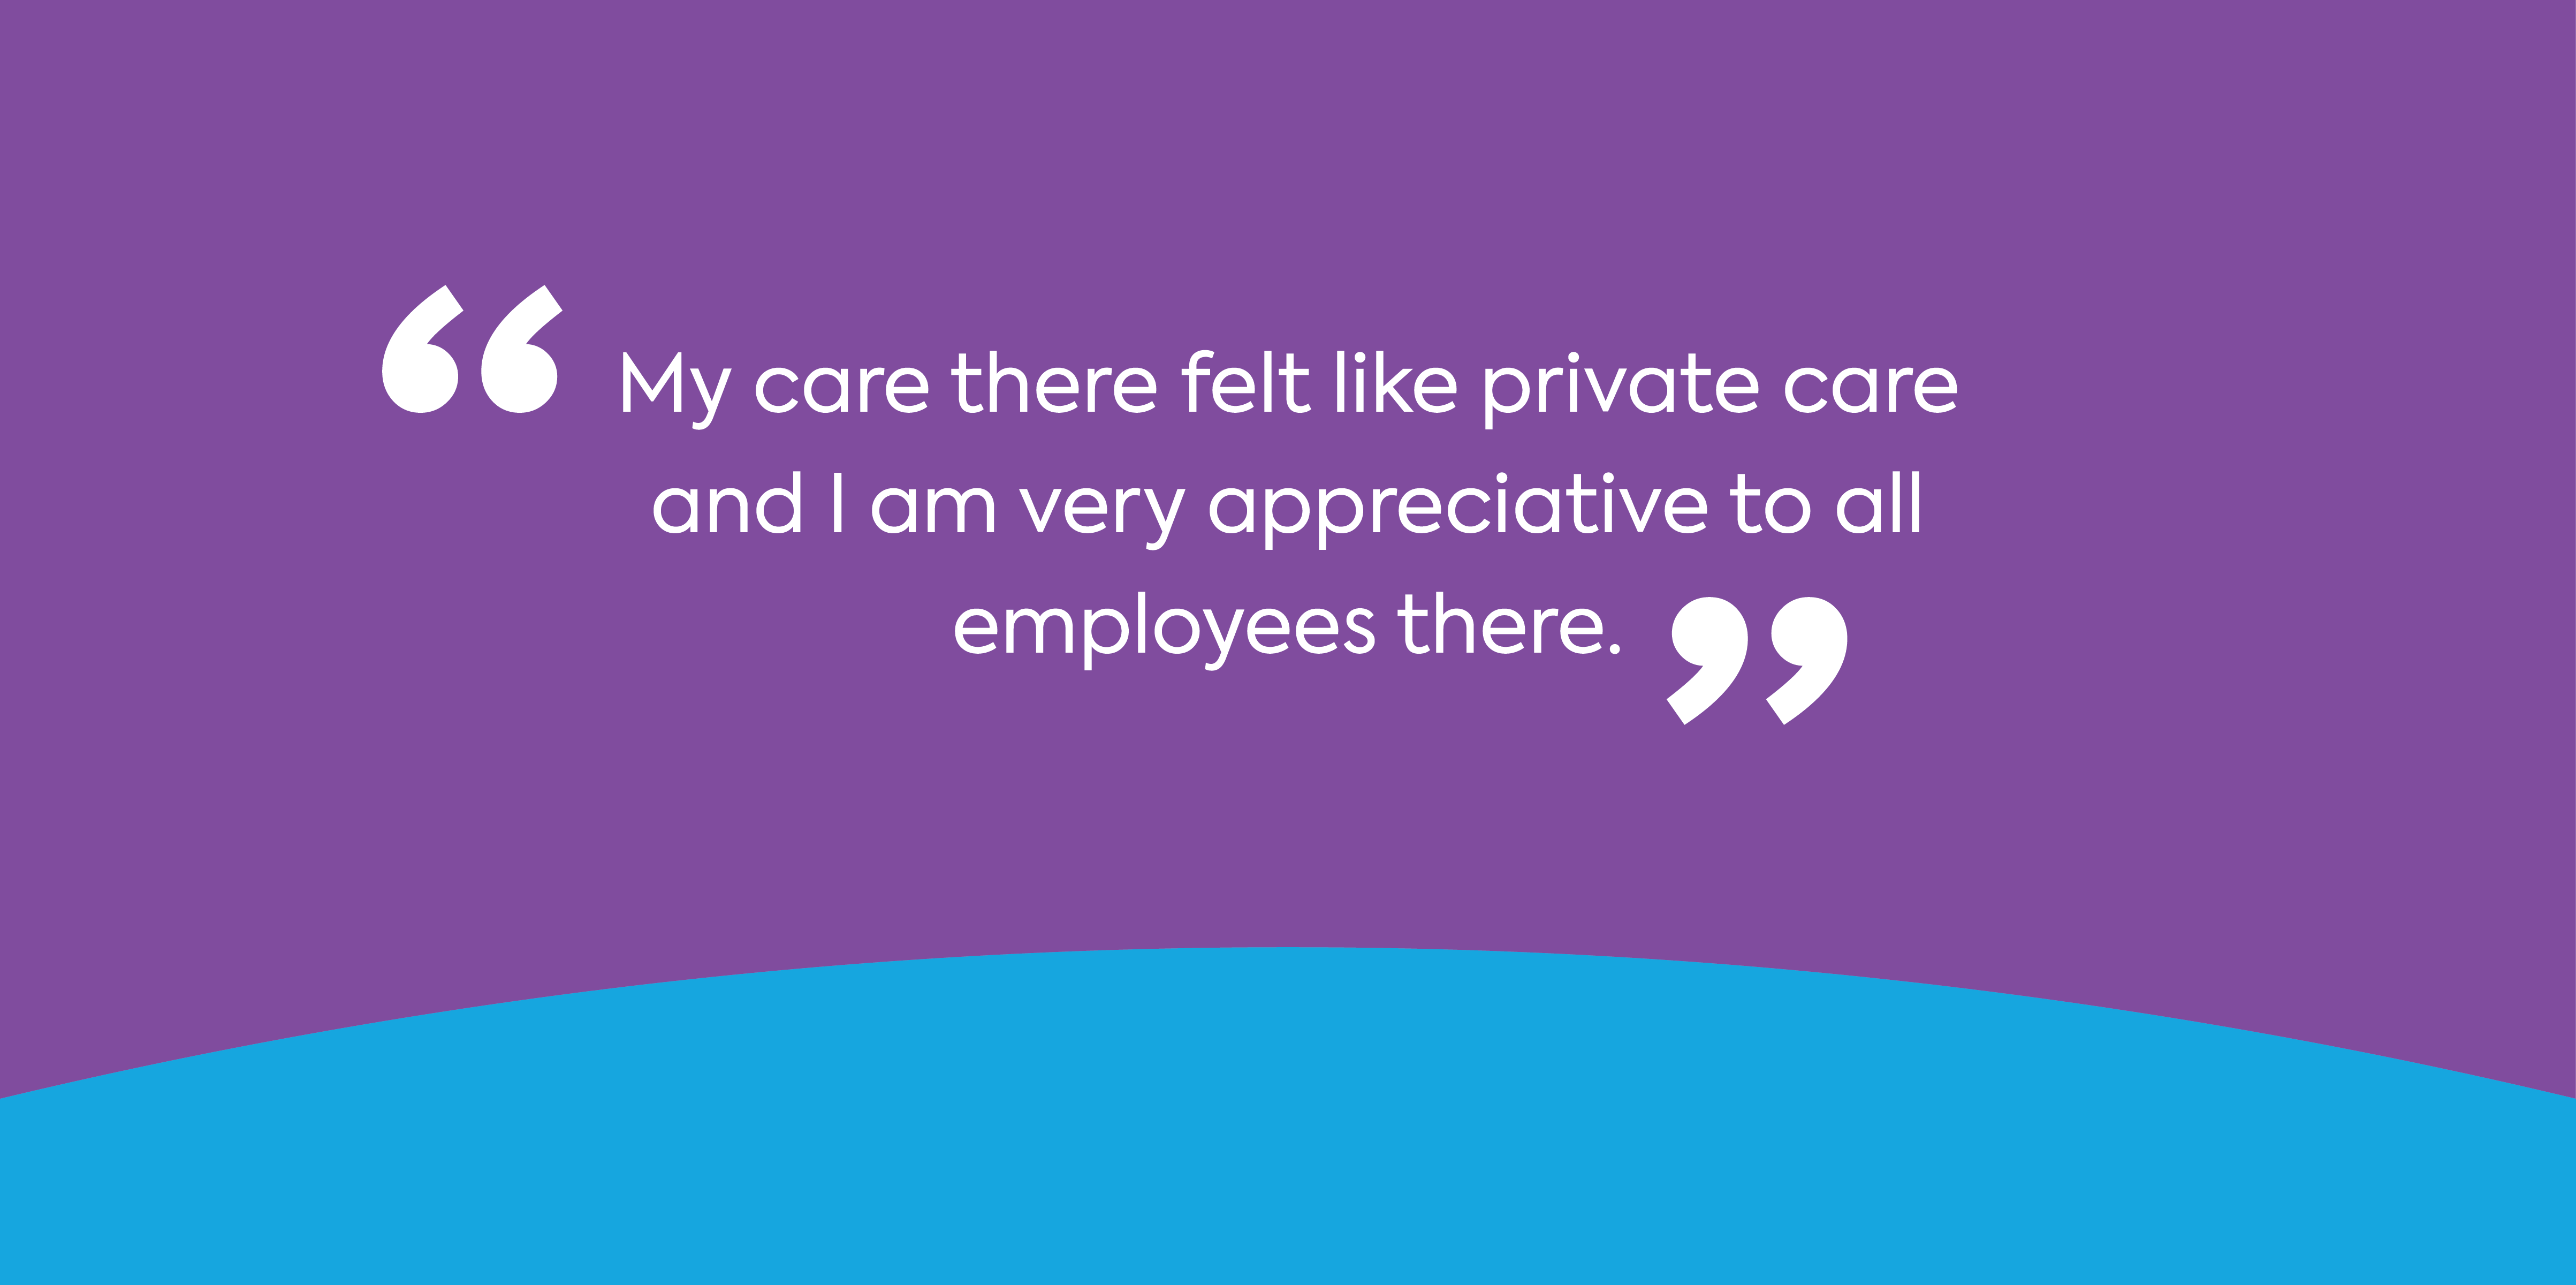 text: My care there felt like private care and I am very appreciative to all employees there.